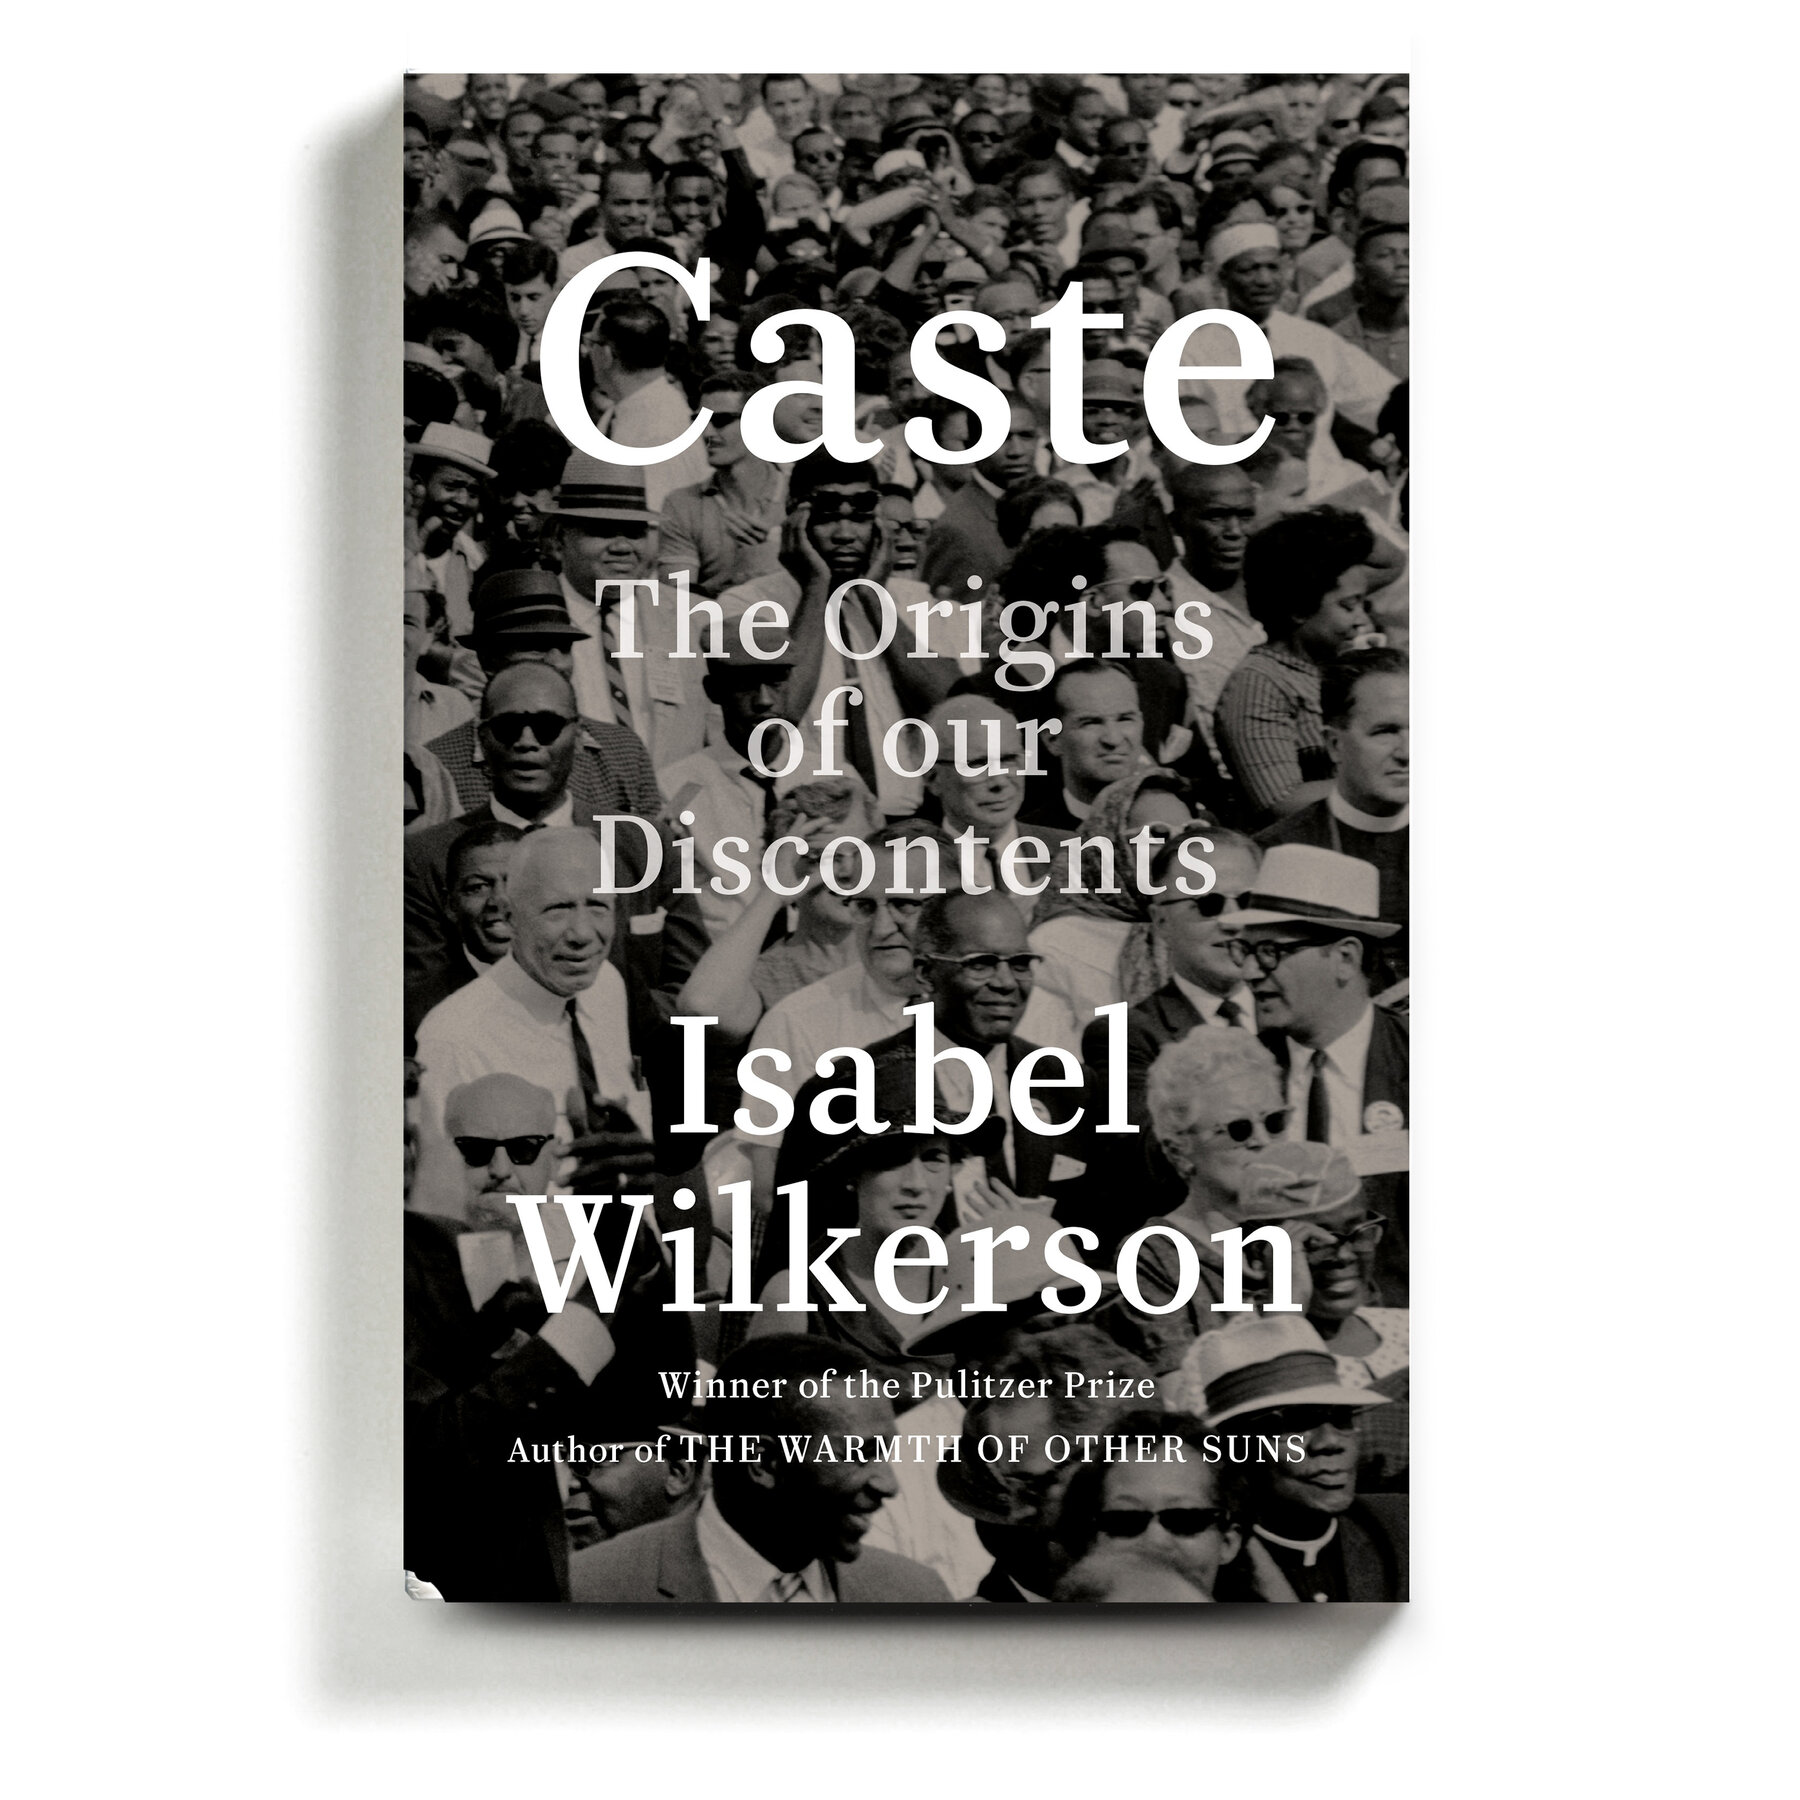 We will be discussing, Caste by Isabel Wilkerson.